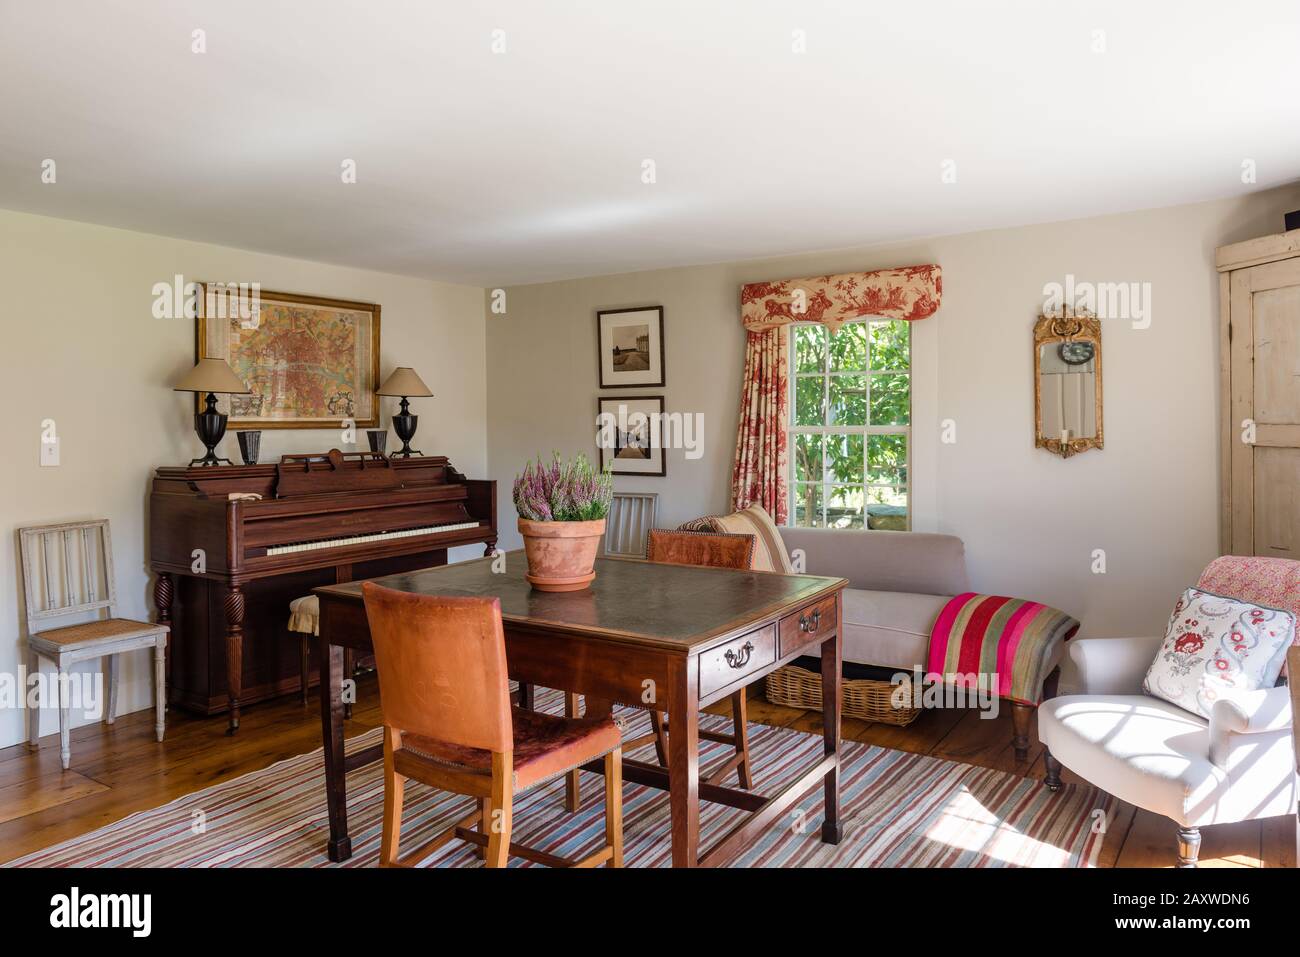 Desk and piano in country style room Stock Photo